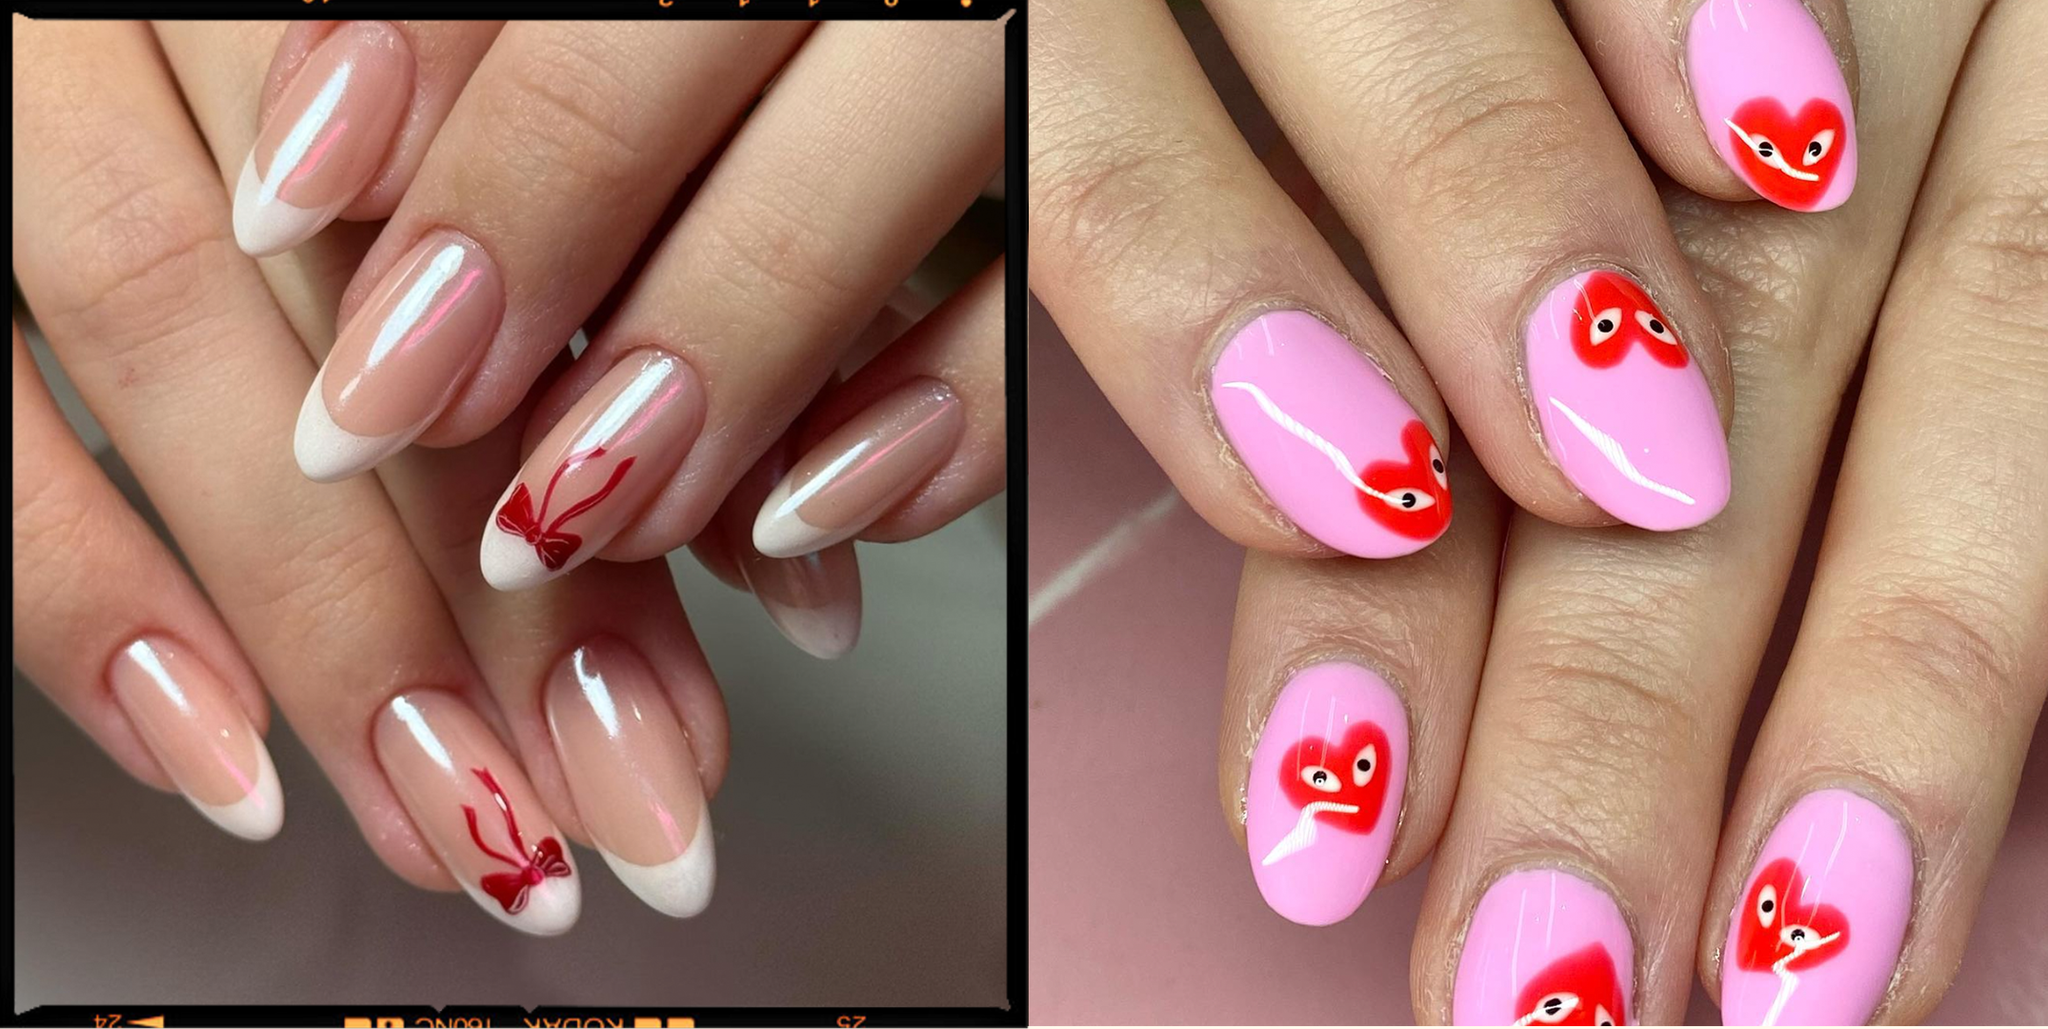 20 Baby Pink Nail Ideas Prove It's the Mani of the Season